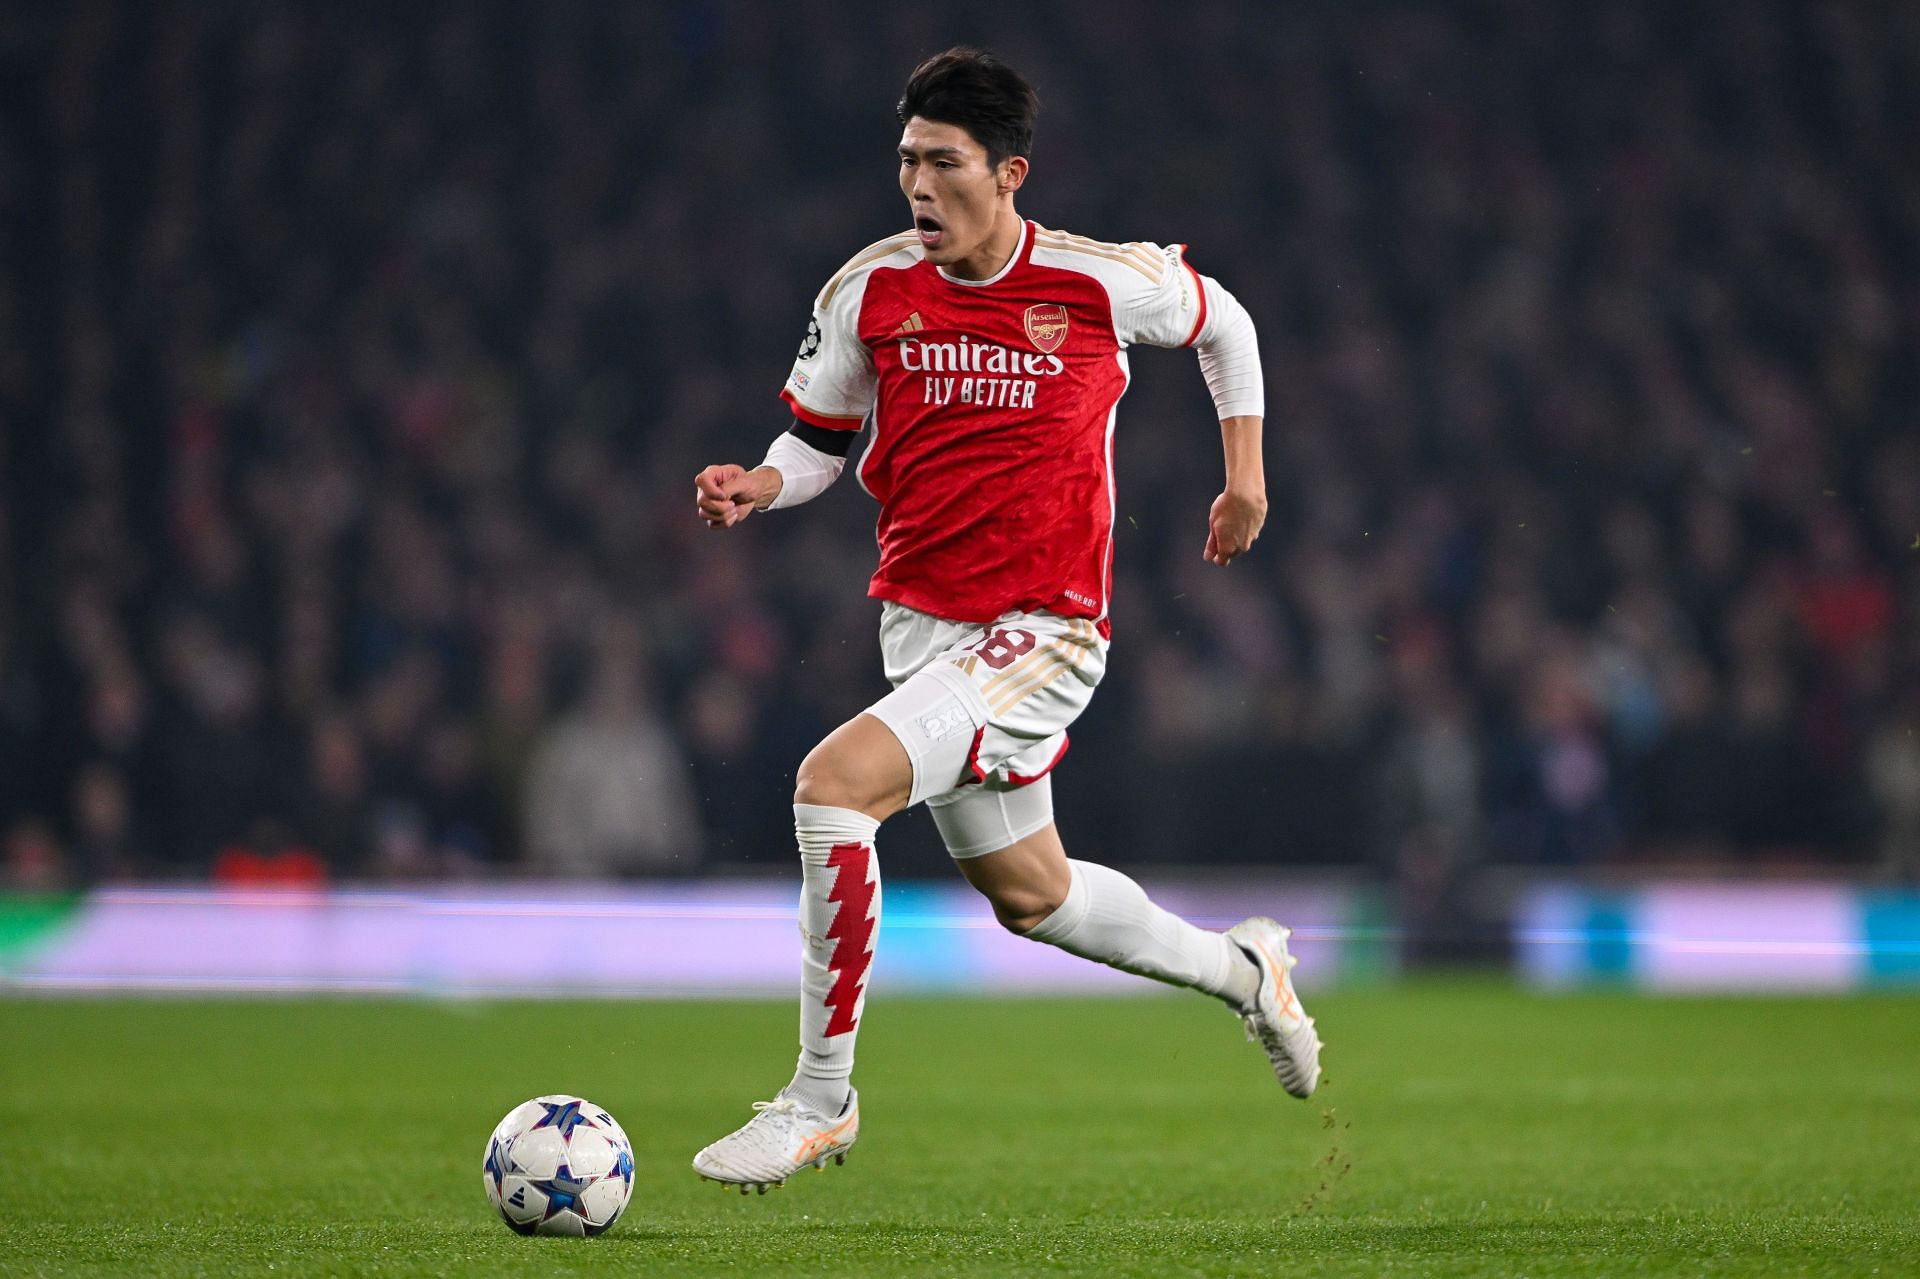 Takehiro Tomiyasu is likely to extend his stay at the Emirates.